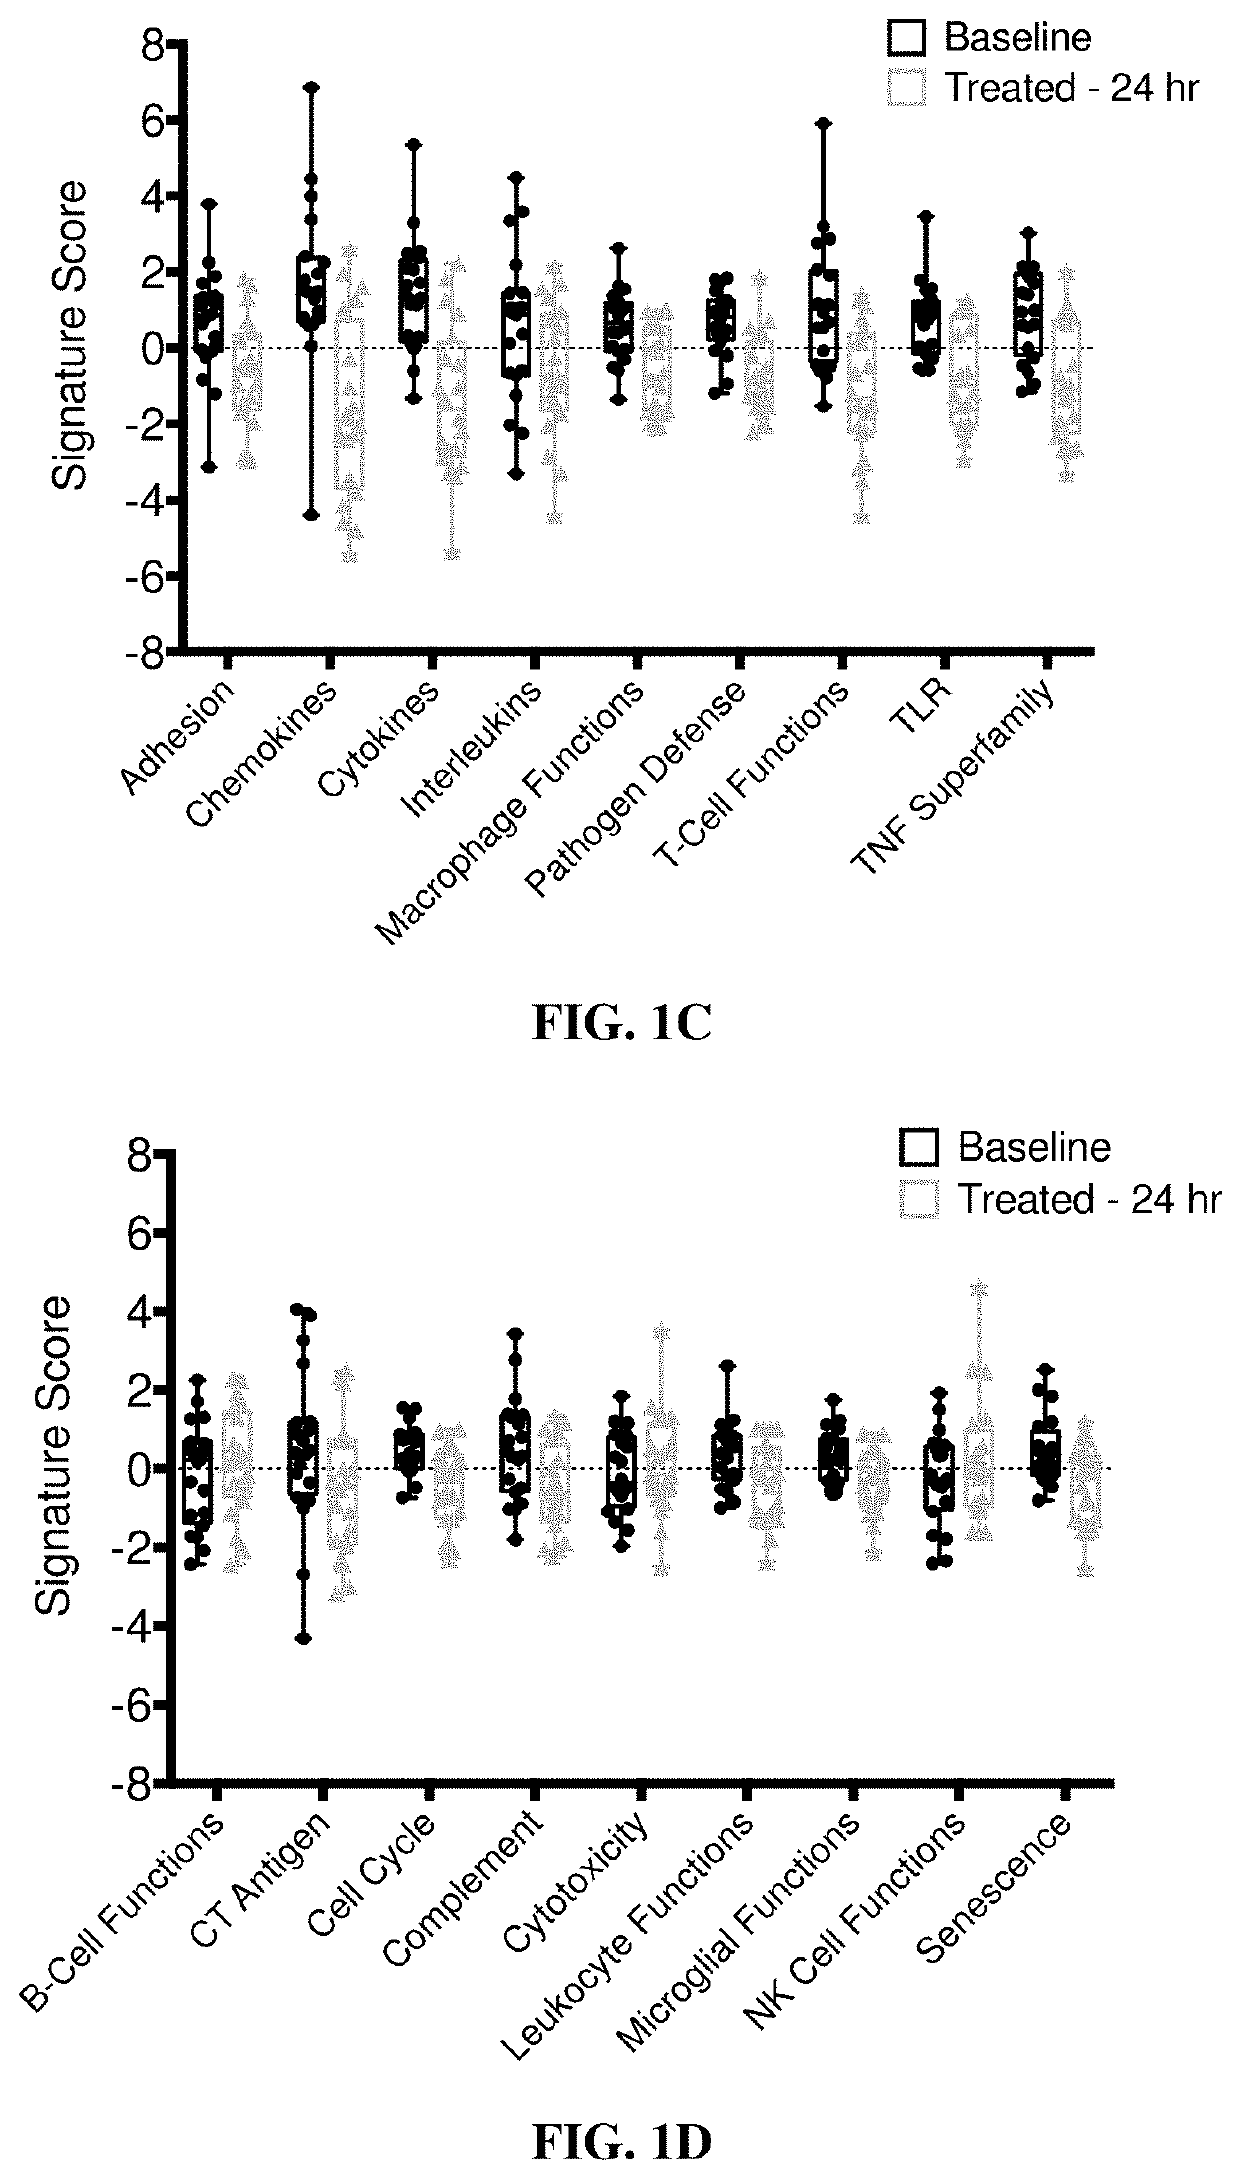 Combination treatments of hsp90 inhibitors for enhancing tumor immunogenicity and methods of use thereof